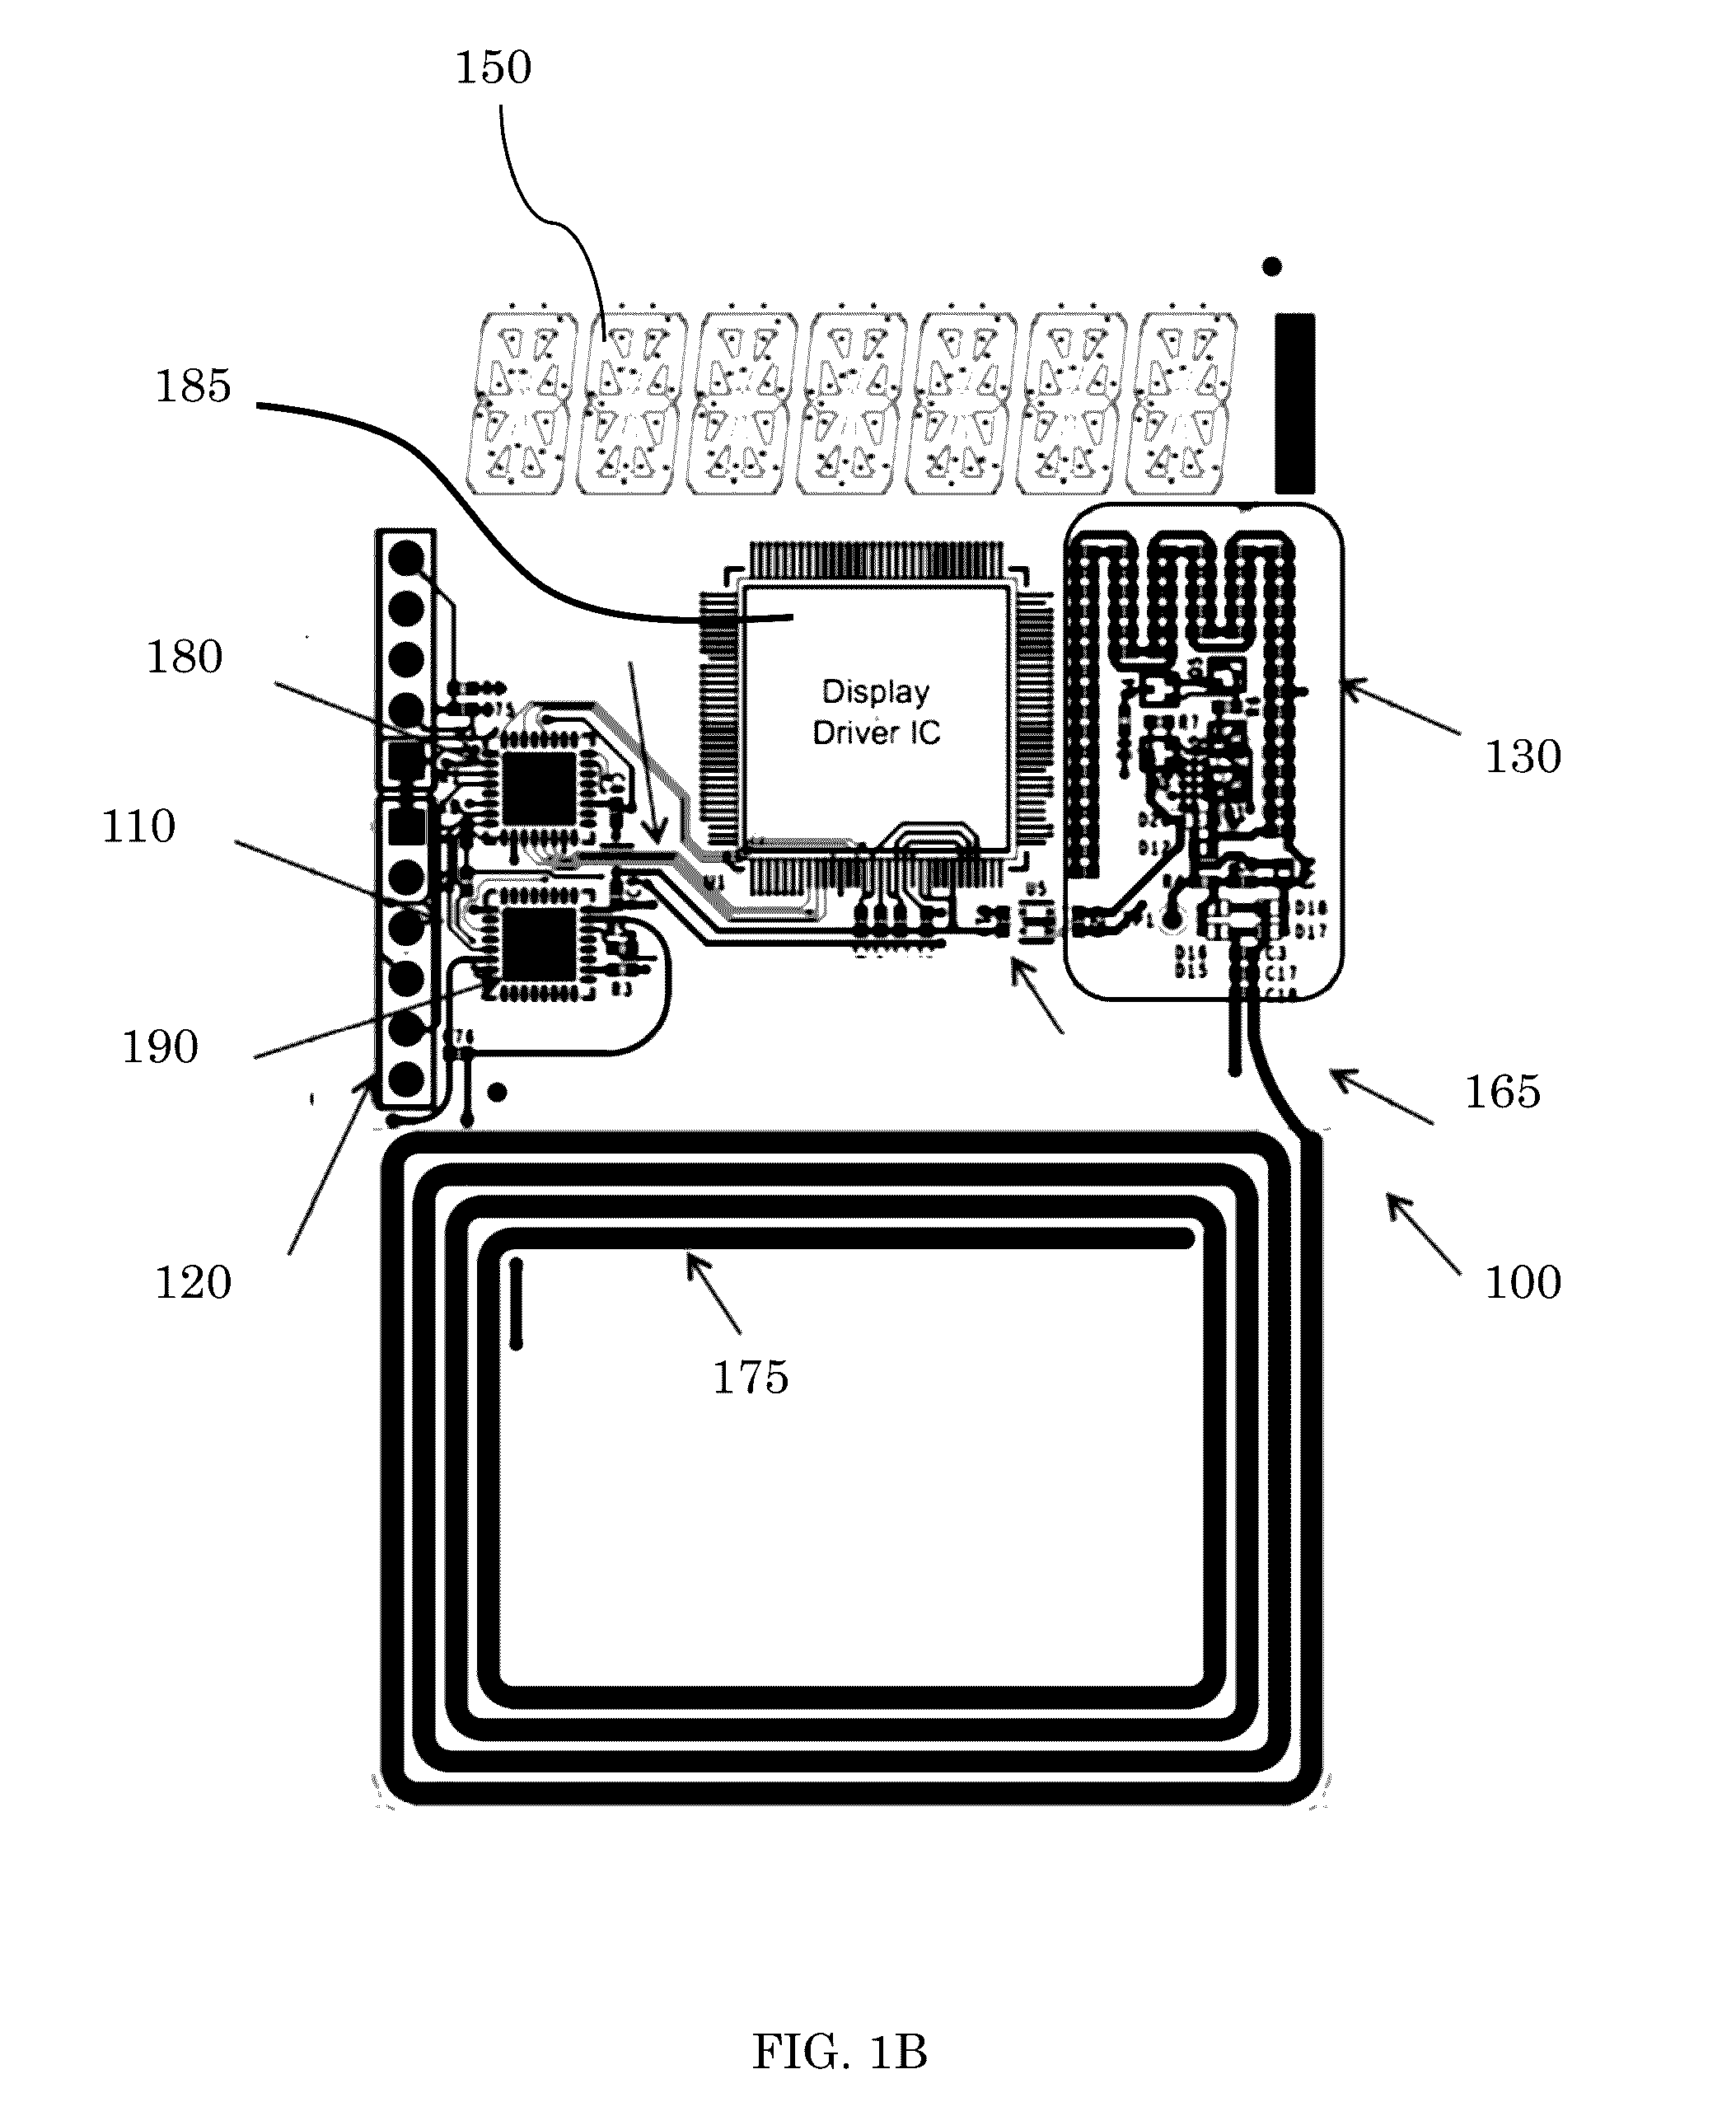 Method and system for secure peer-to-peer mobile communications